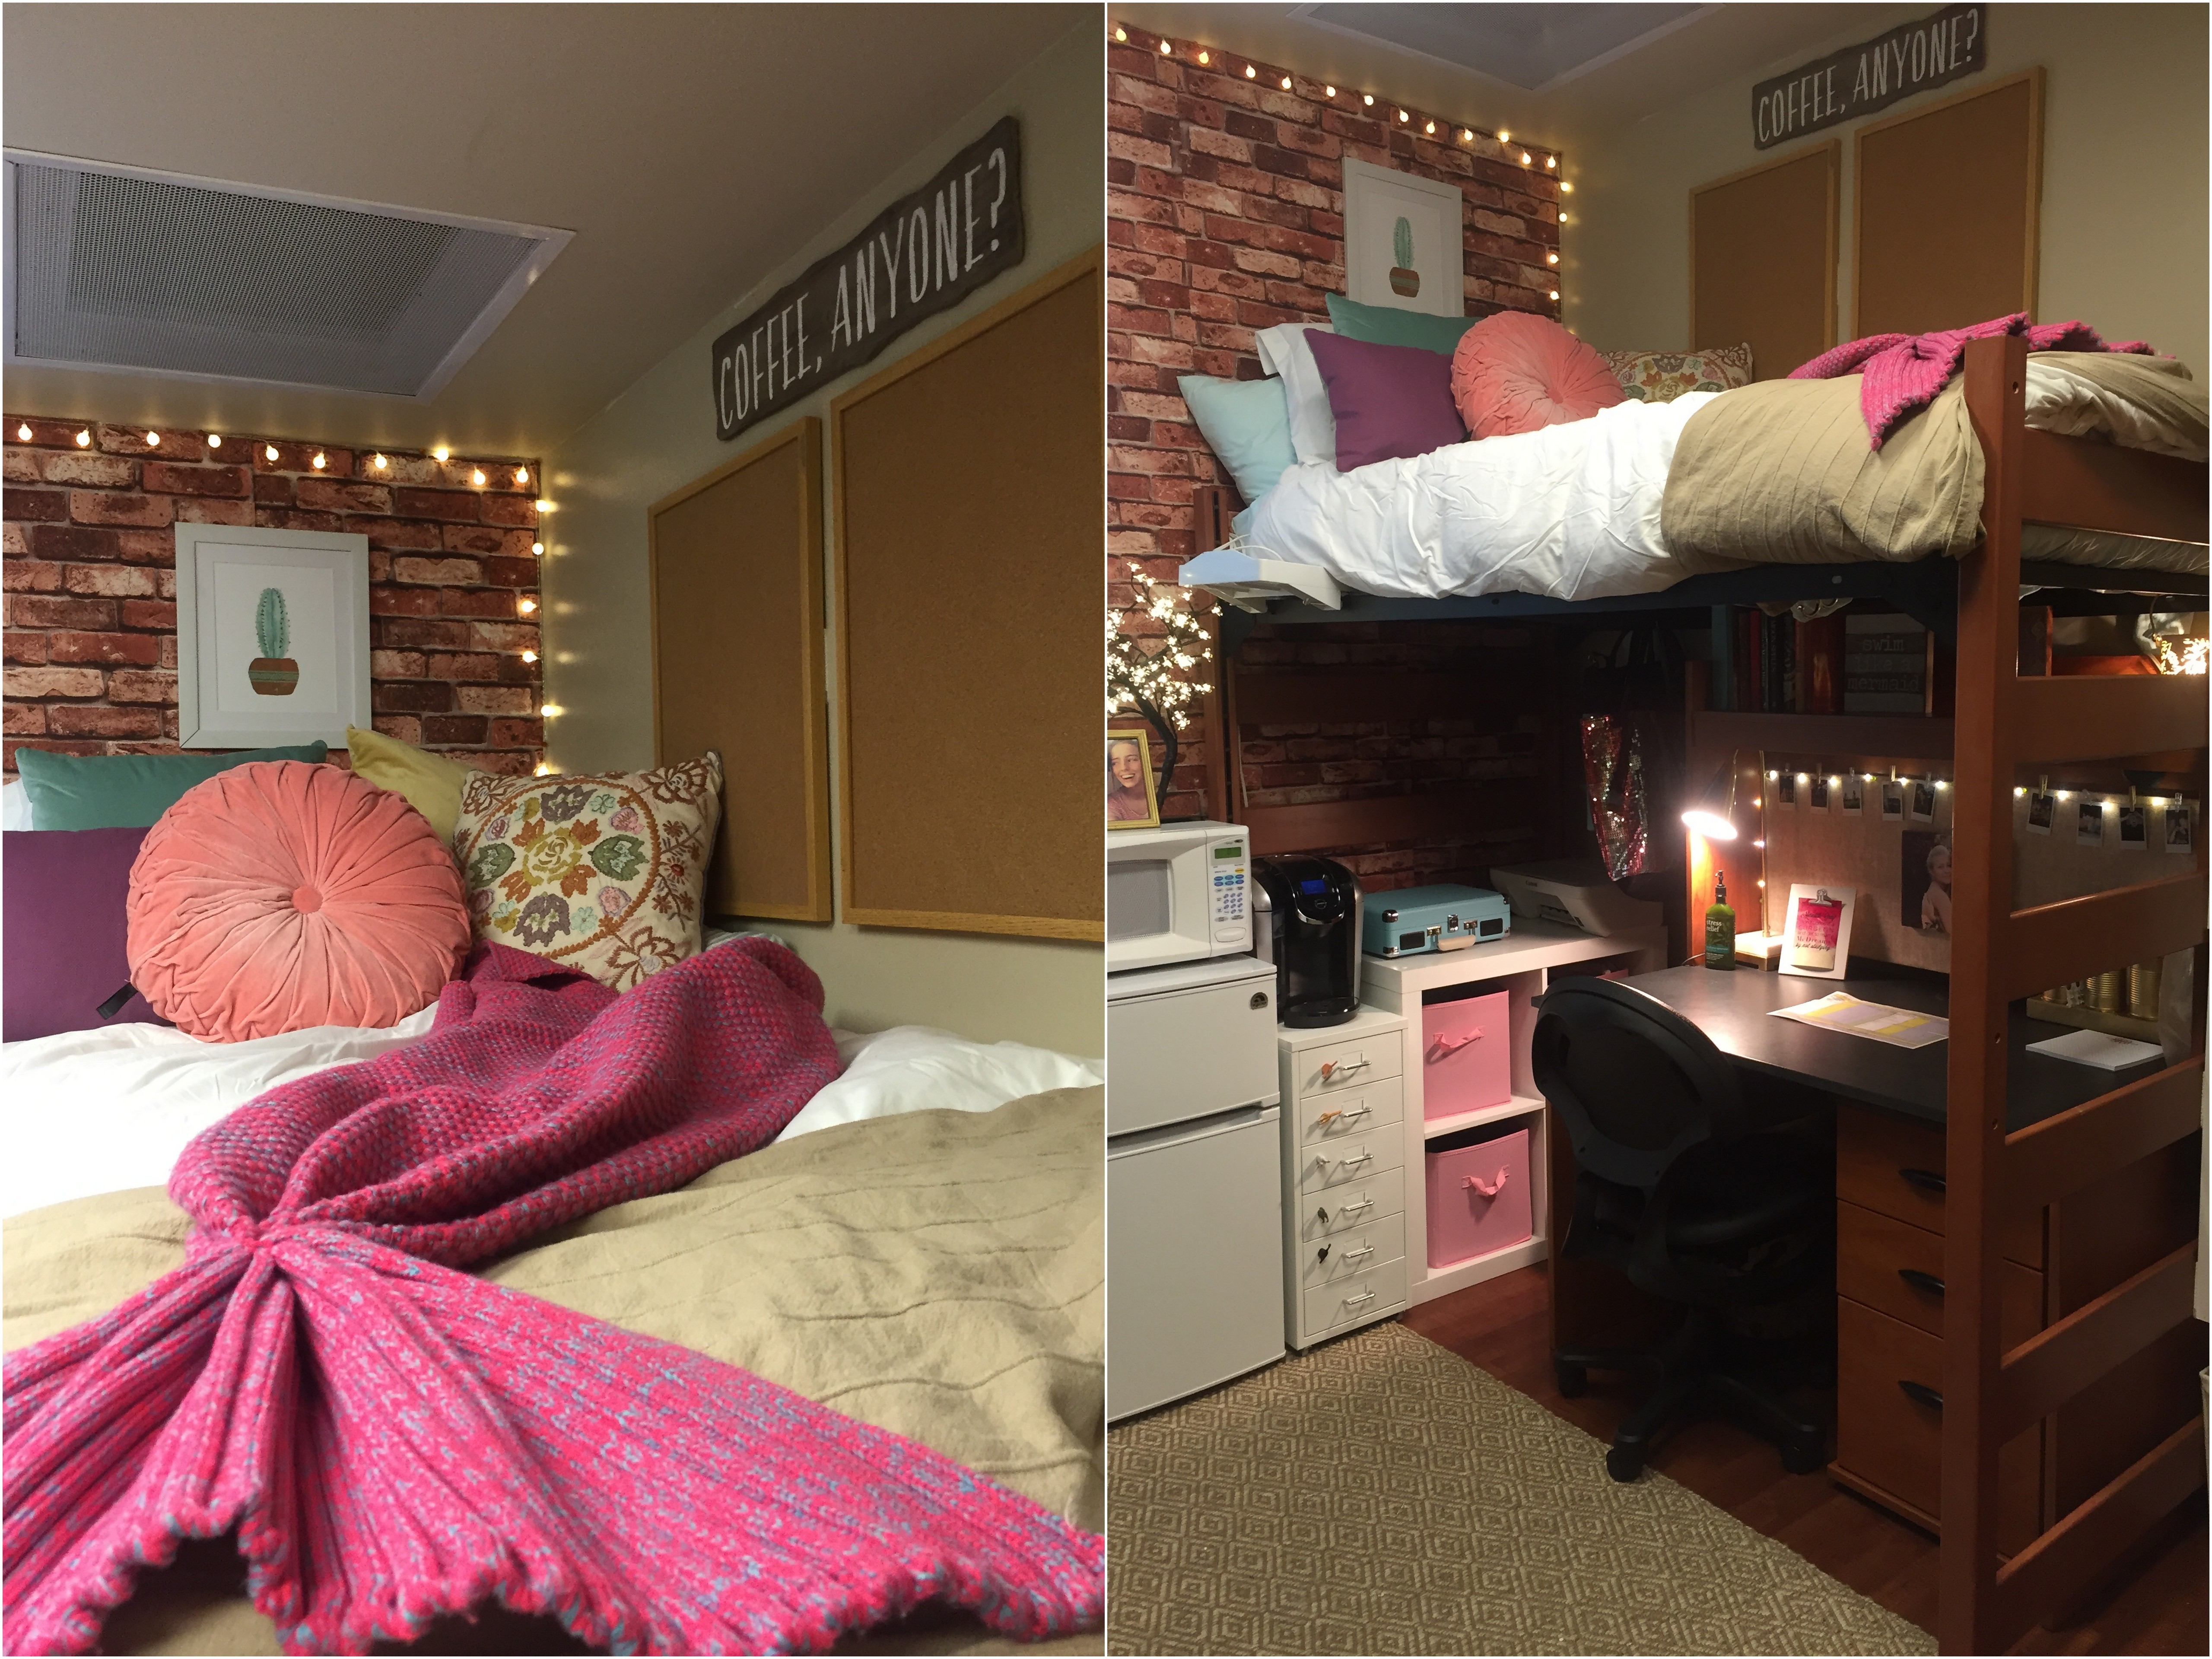 Creative Dorm Room Ideas to Make Your Space More Cozy